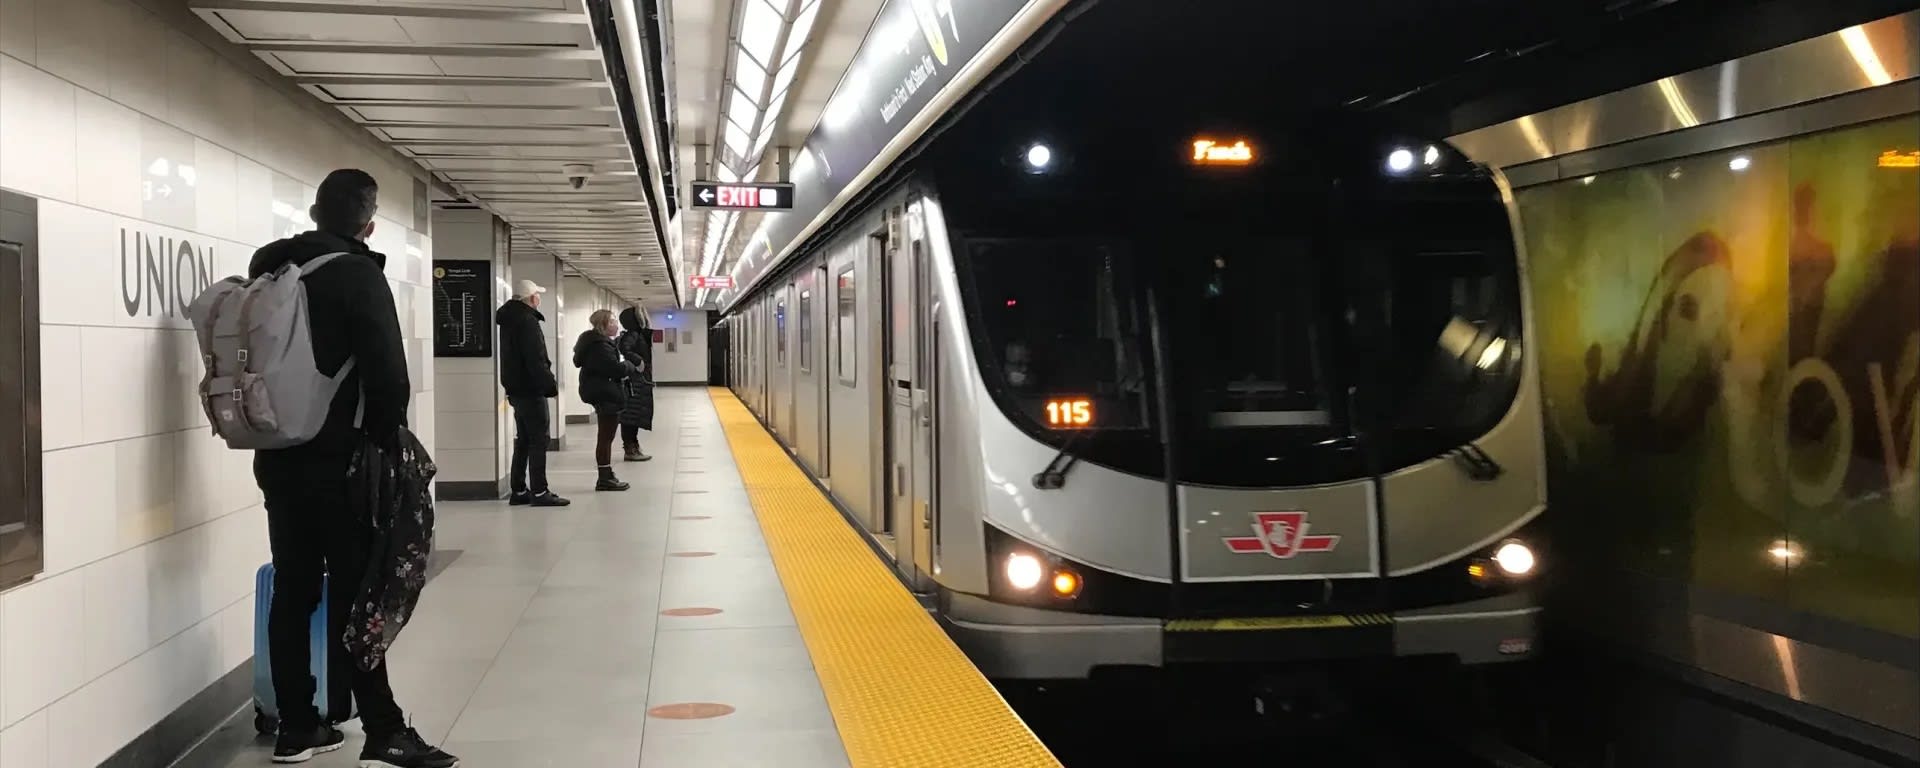 Statement from Metrolinx CEO about Yonge North Subway Extension